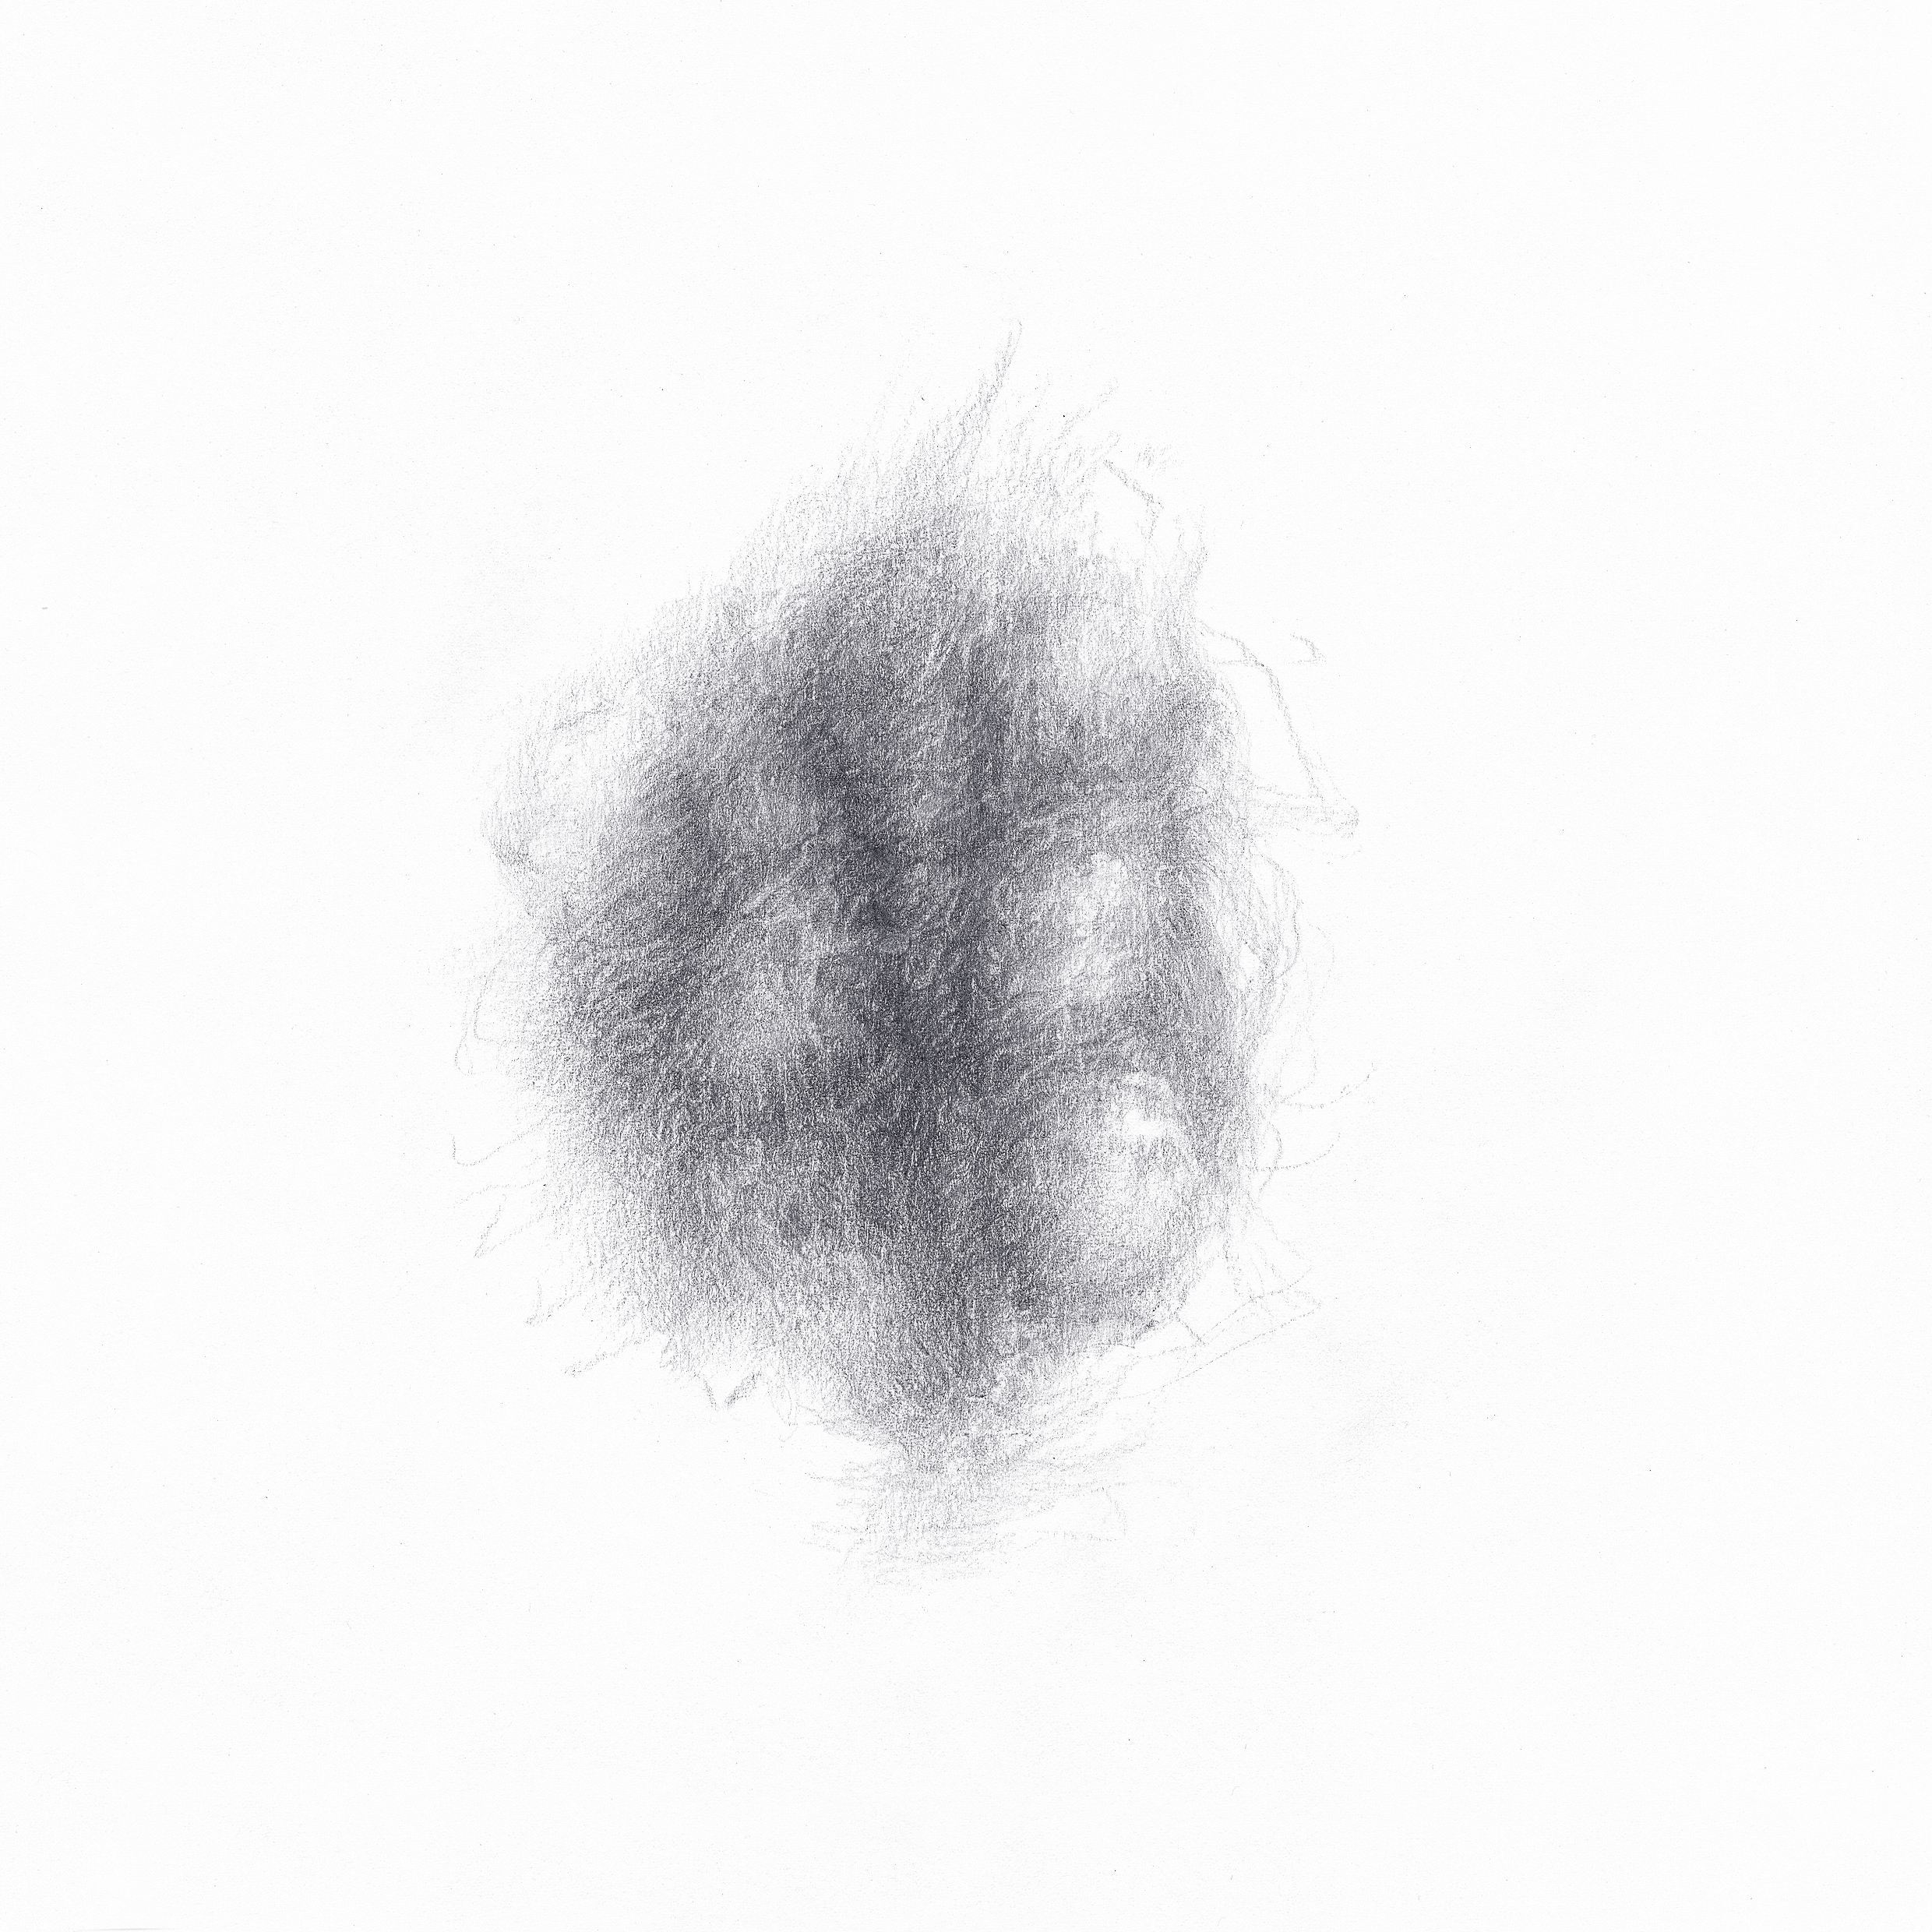  Drawing #12, 2011  Graphite on paper, 21.5 x 21.5 cm 